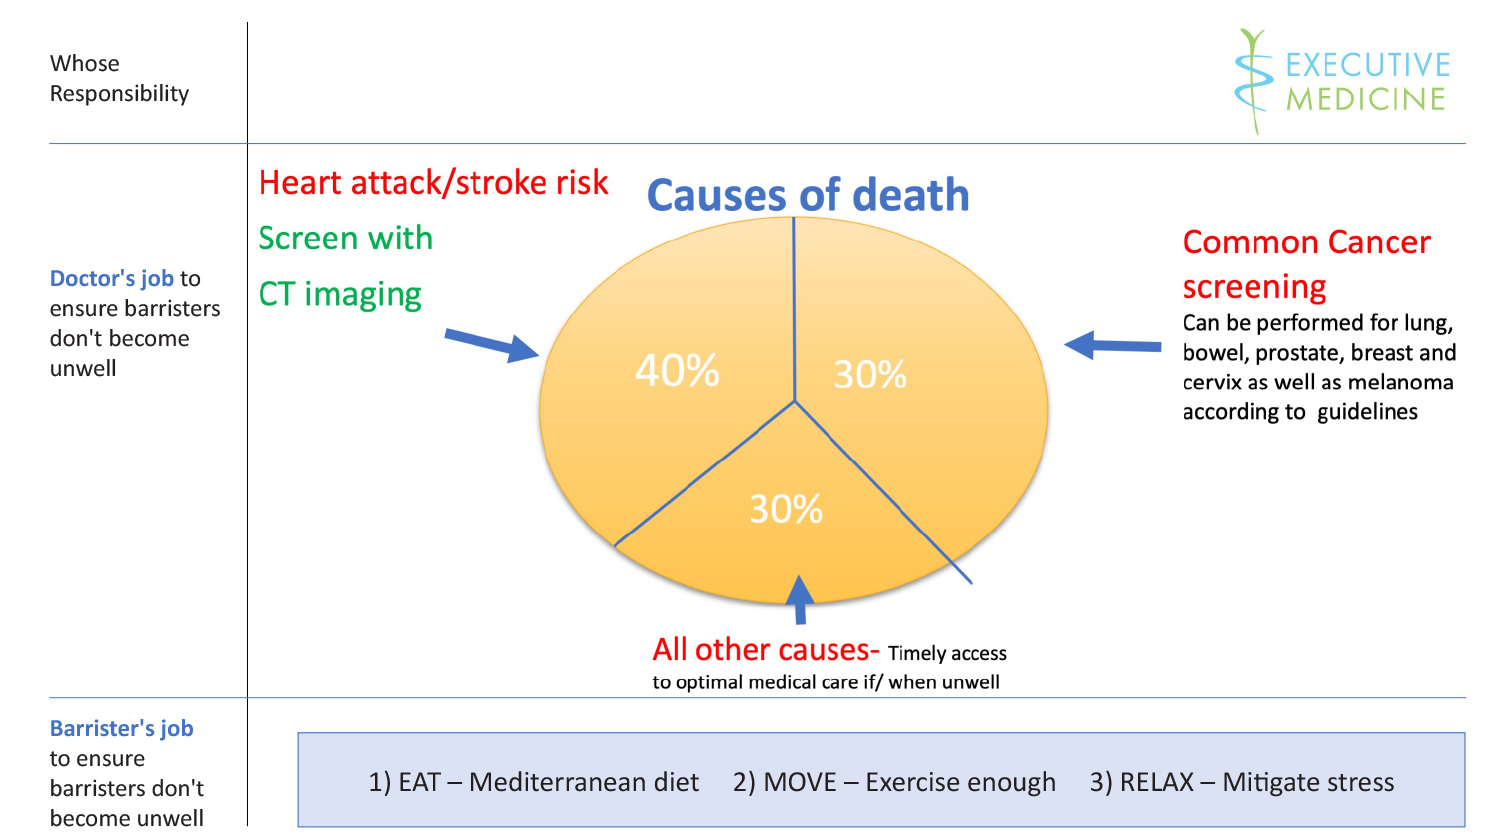 causes of death pie chart: Screen with CT imaging: 40%, Common Cancer screening: 30%, All other causes: 30%. 